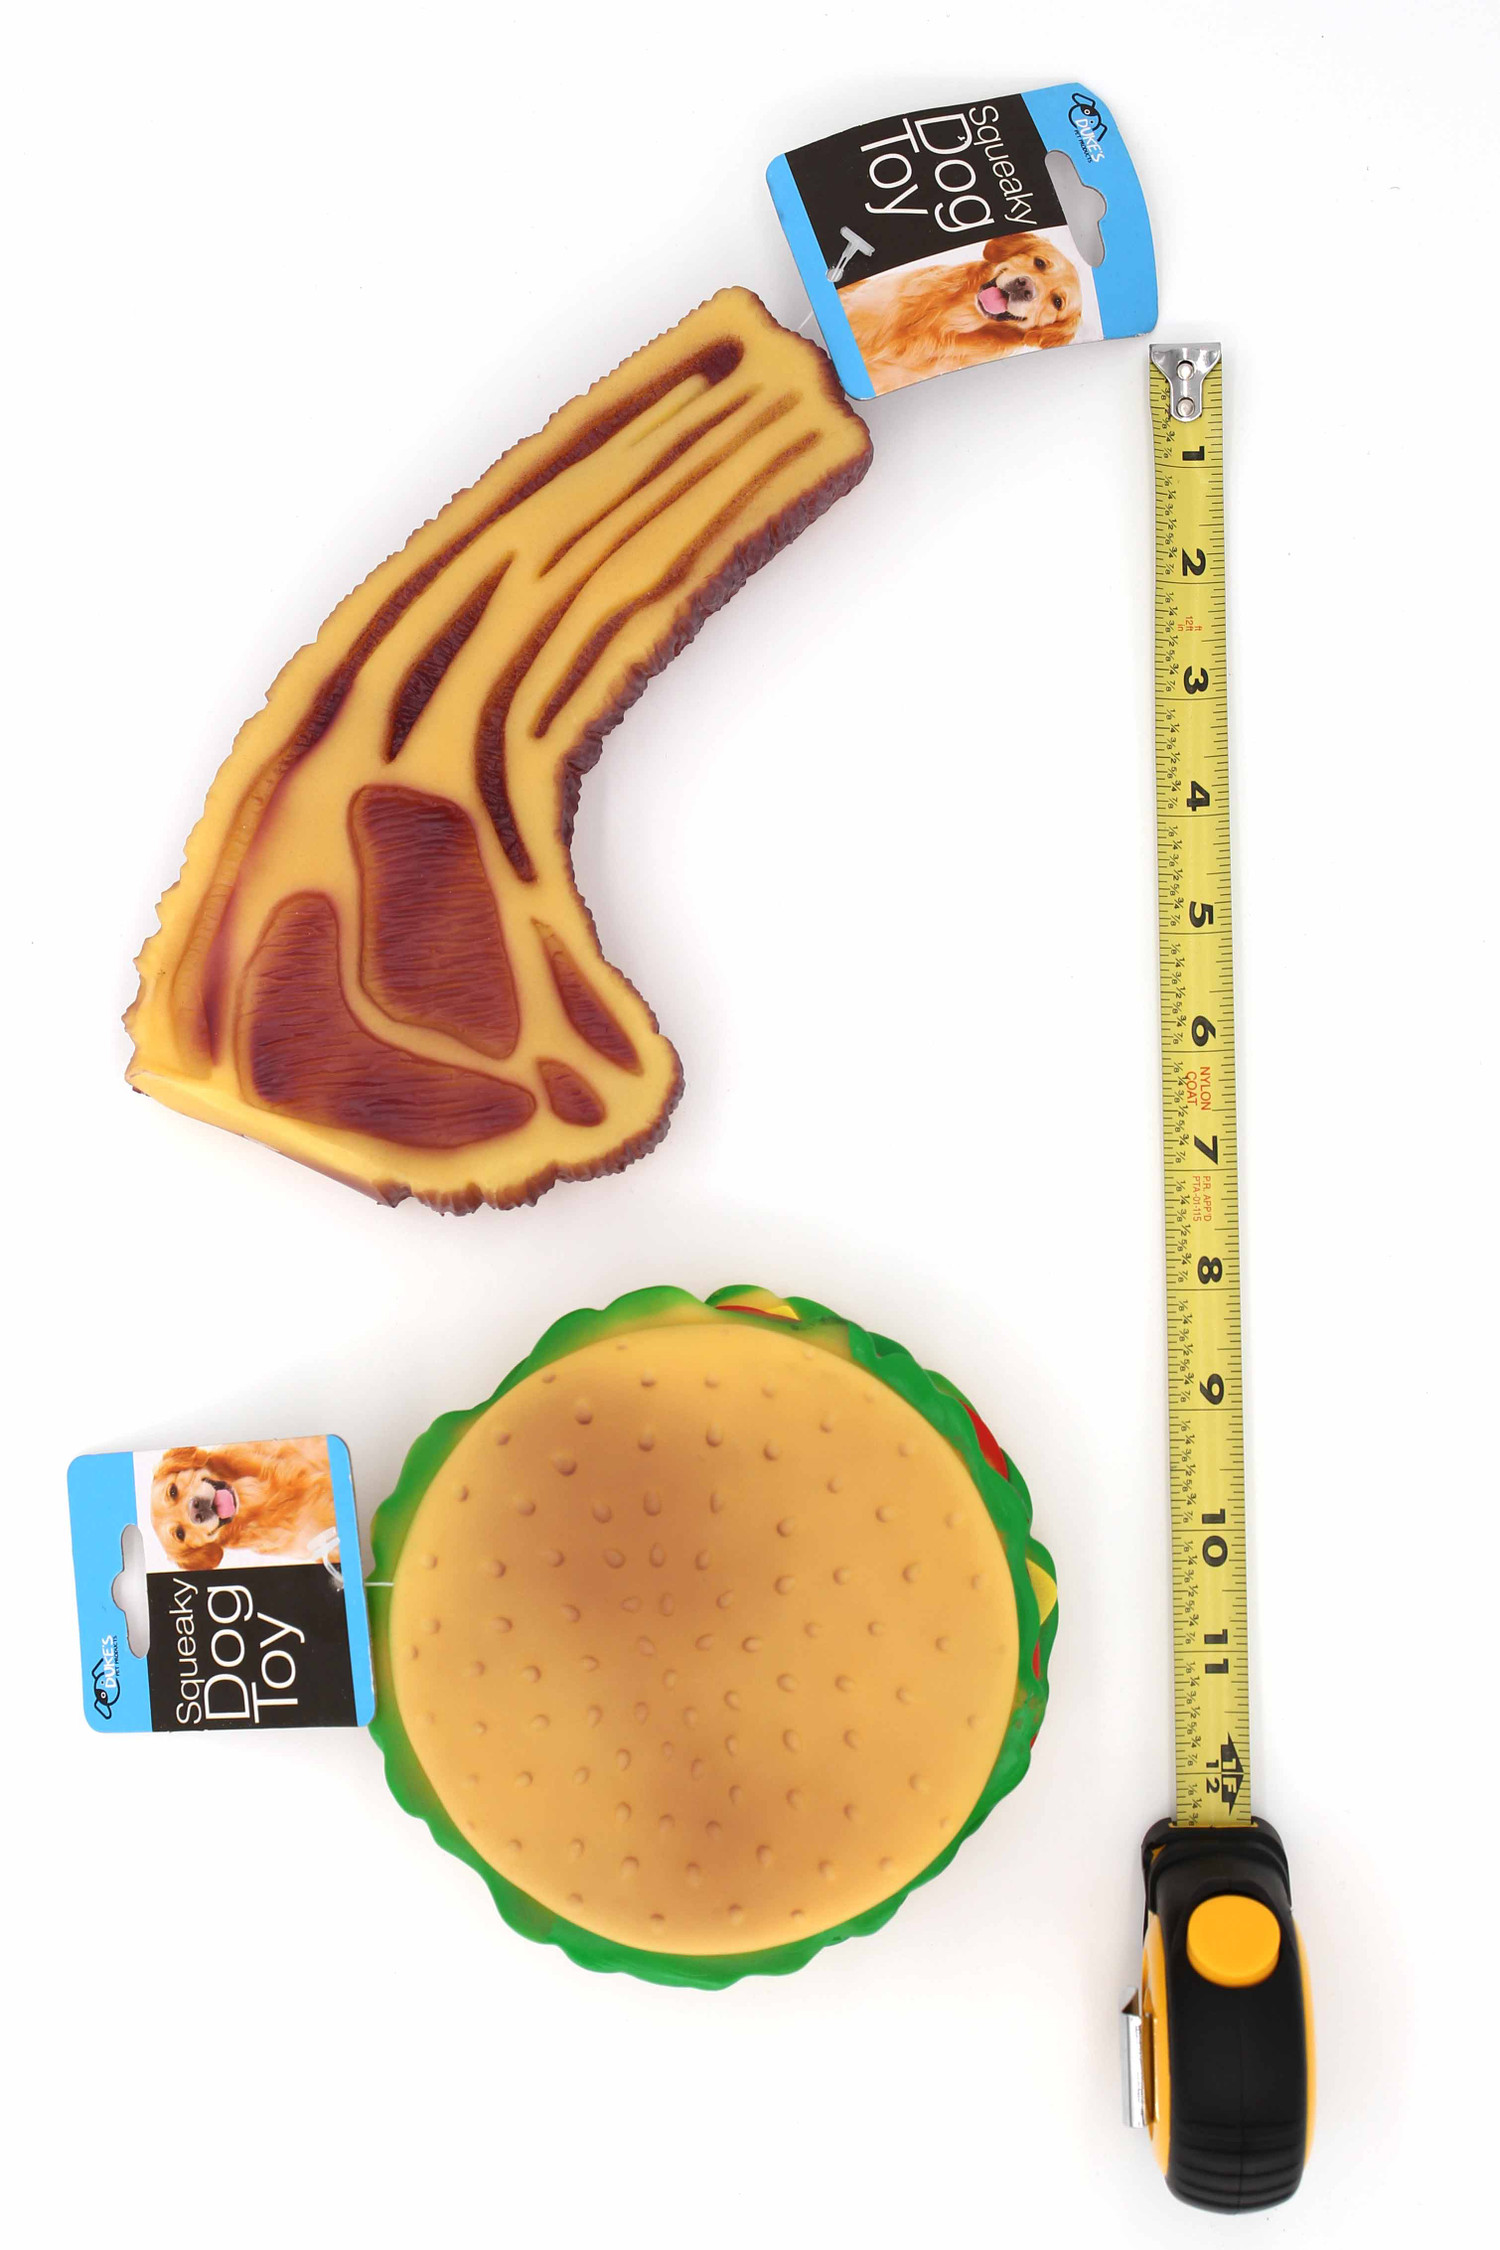 Steak or Hamburger Squeaky Dog Toy Showing Ruler